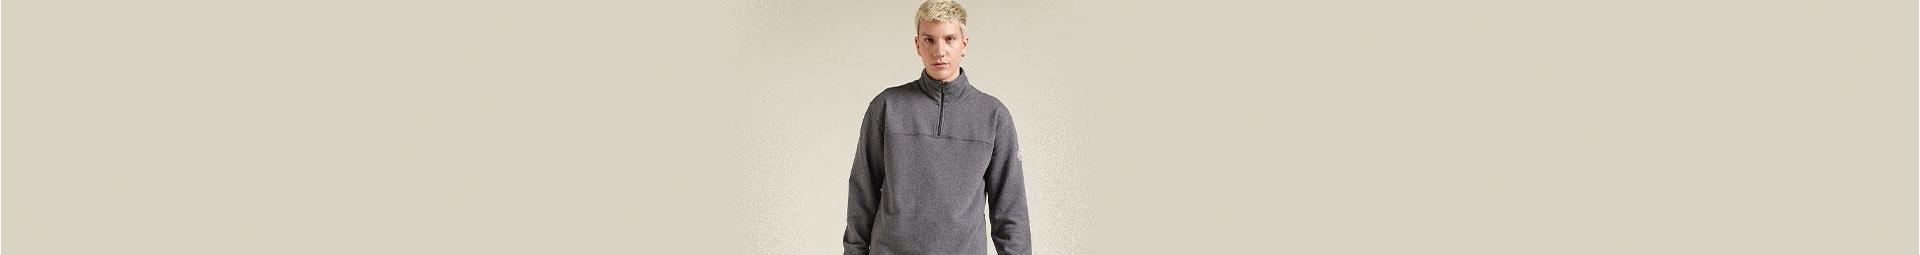 Pullovers pour homme | Pyrenex